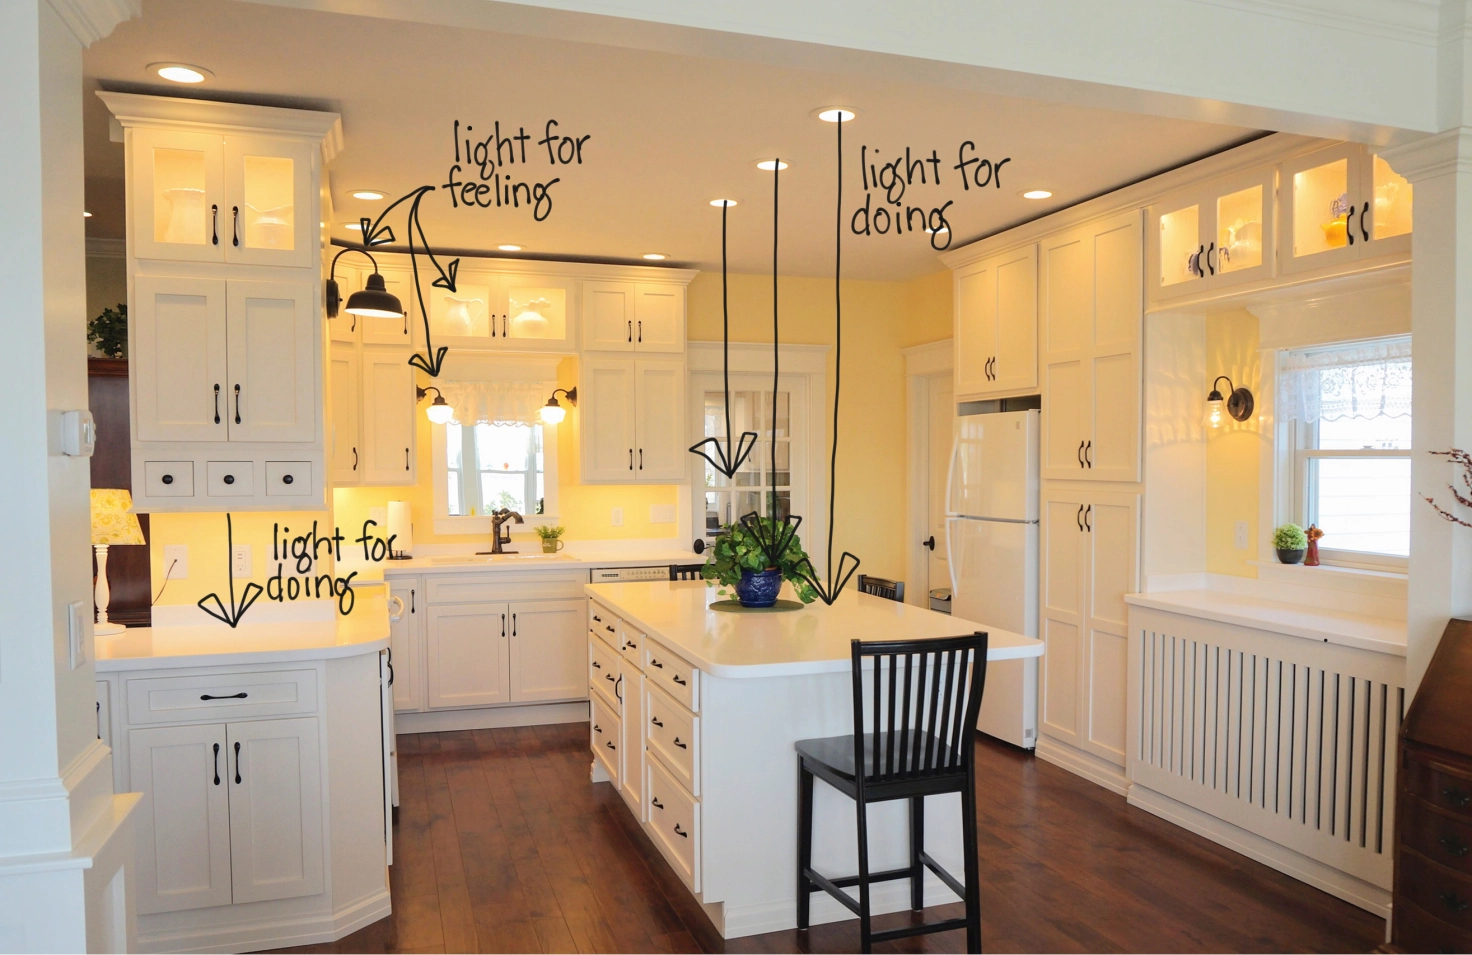 A very brightly lit modern white kitchen labelled "light for feeling" and "light for doing"